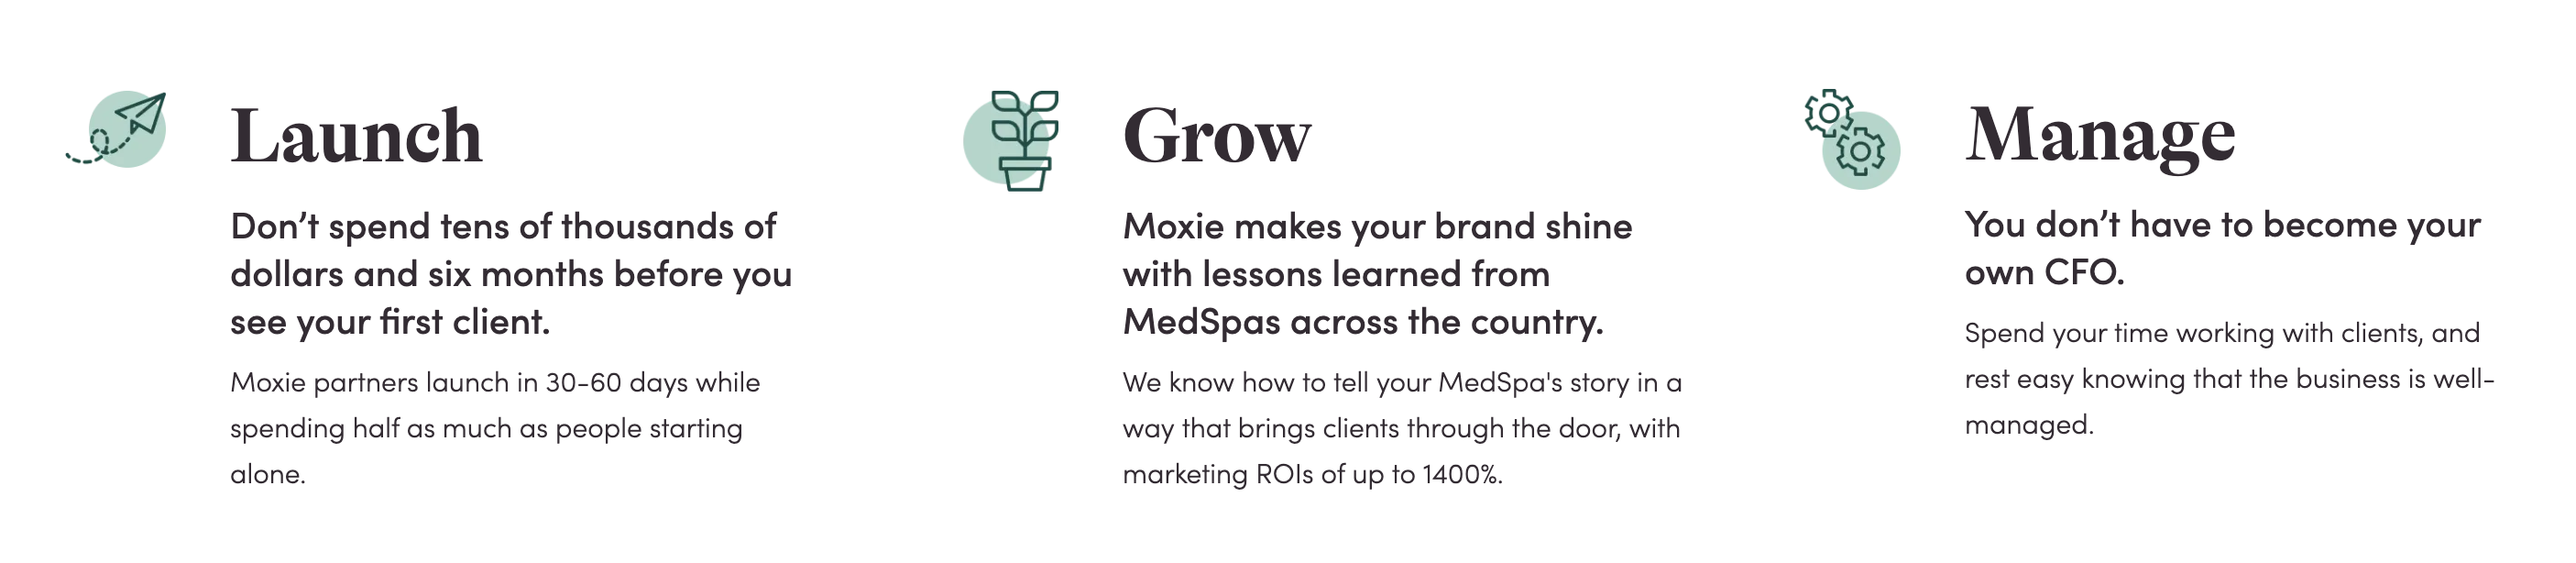 A description of how Moxie med spas work through the launch, growth, and management stages 